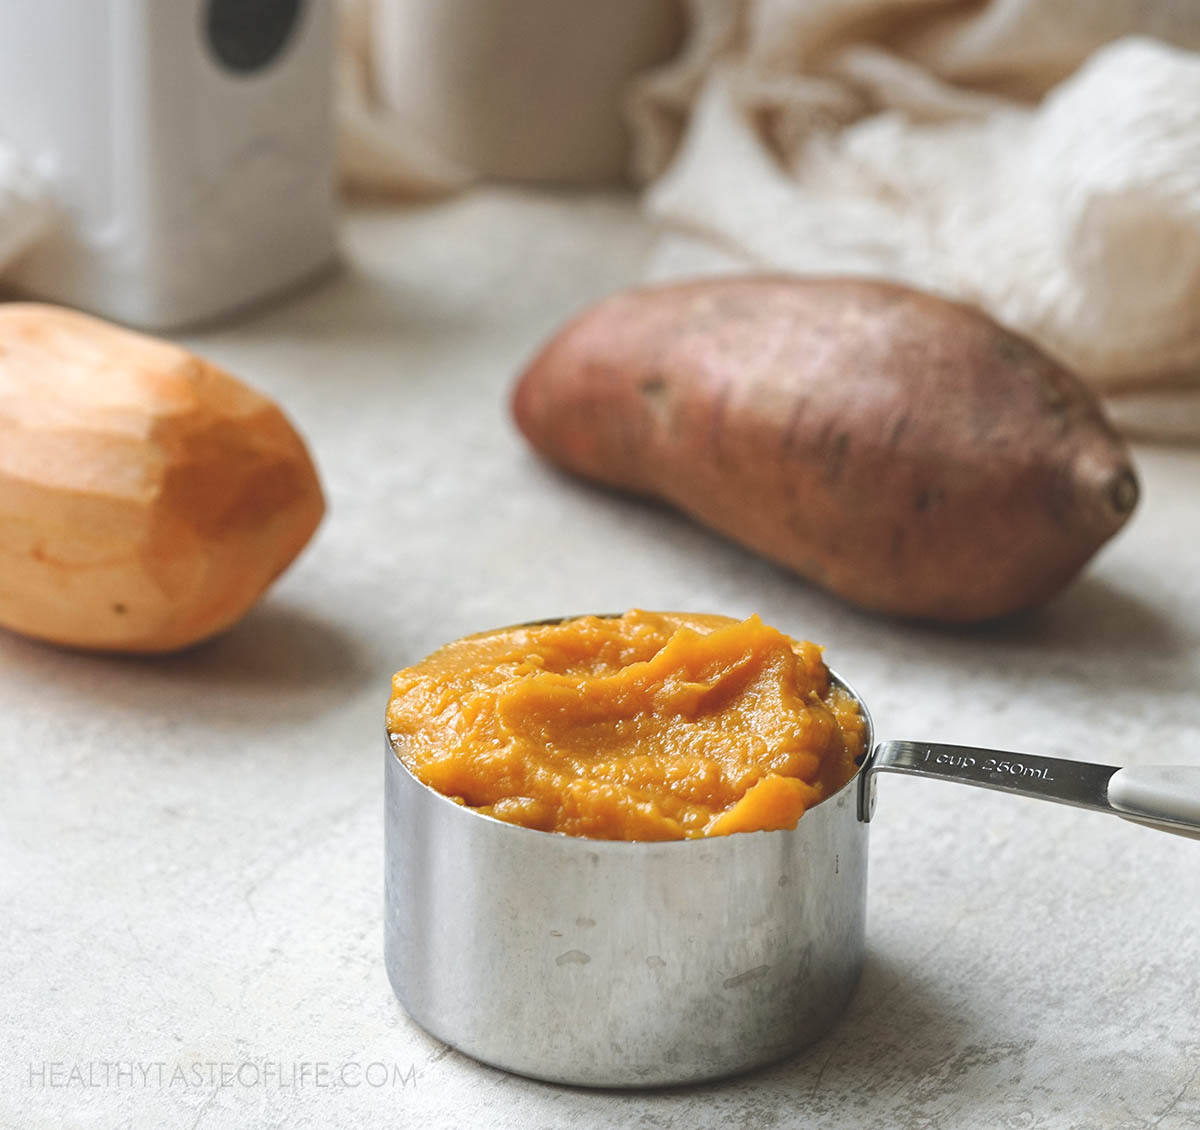 A cup with sweet potato puree or mashed.